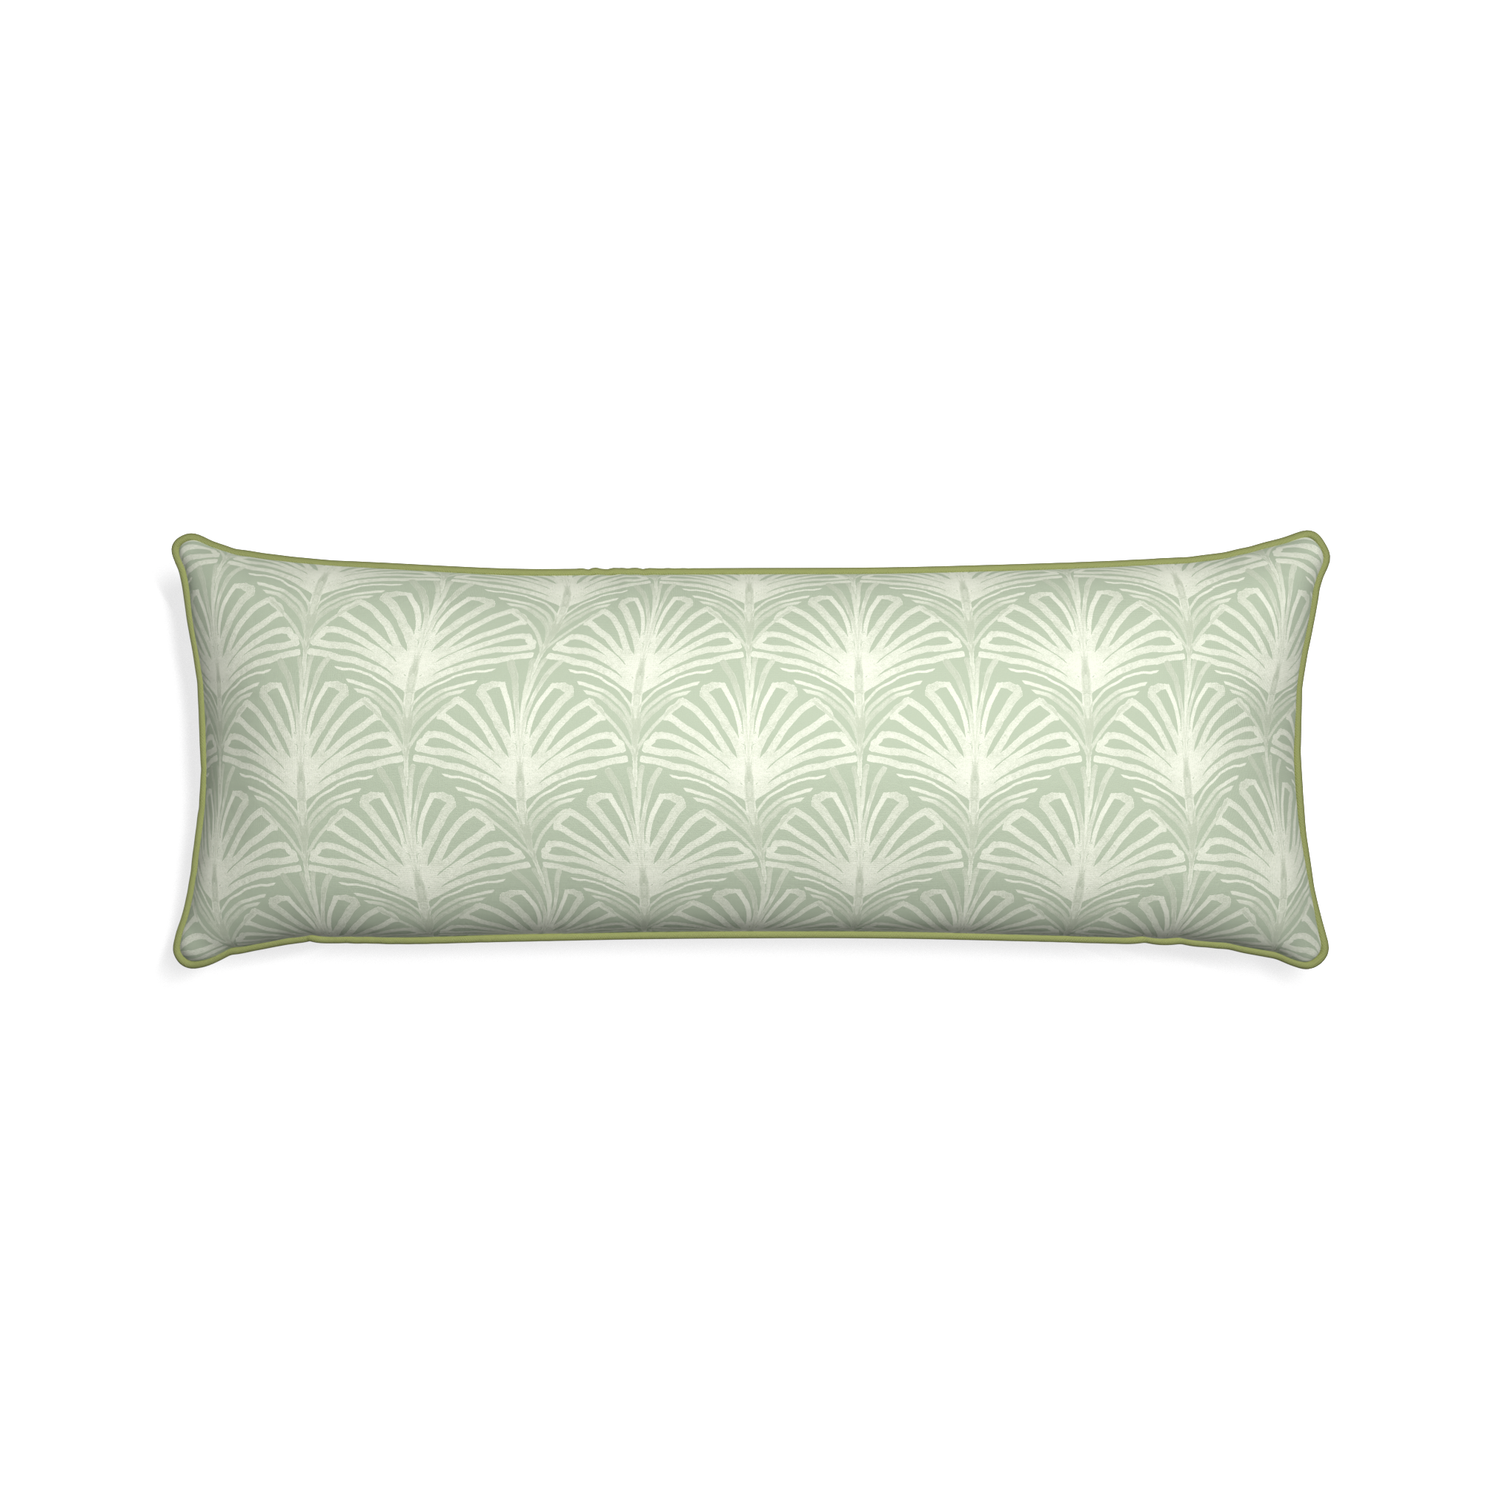 Xl-lumbar suzy sage custom sage green palmpillow with moss piping on white background